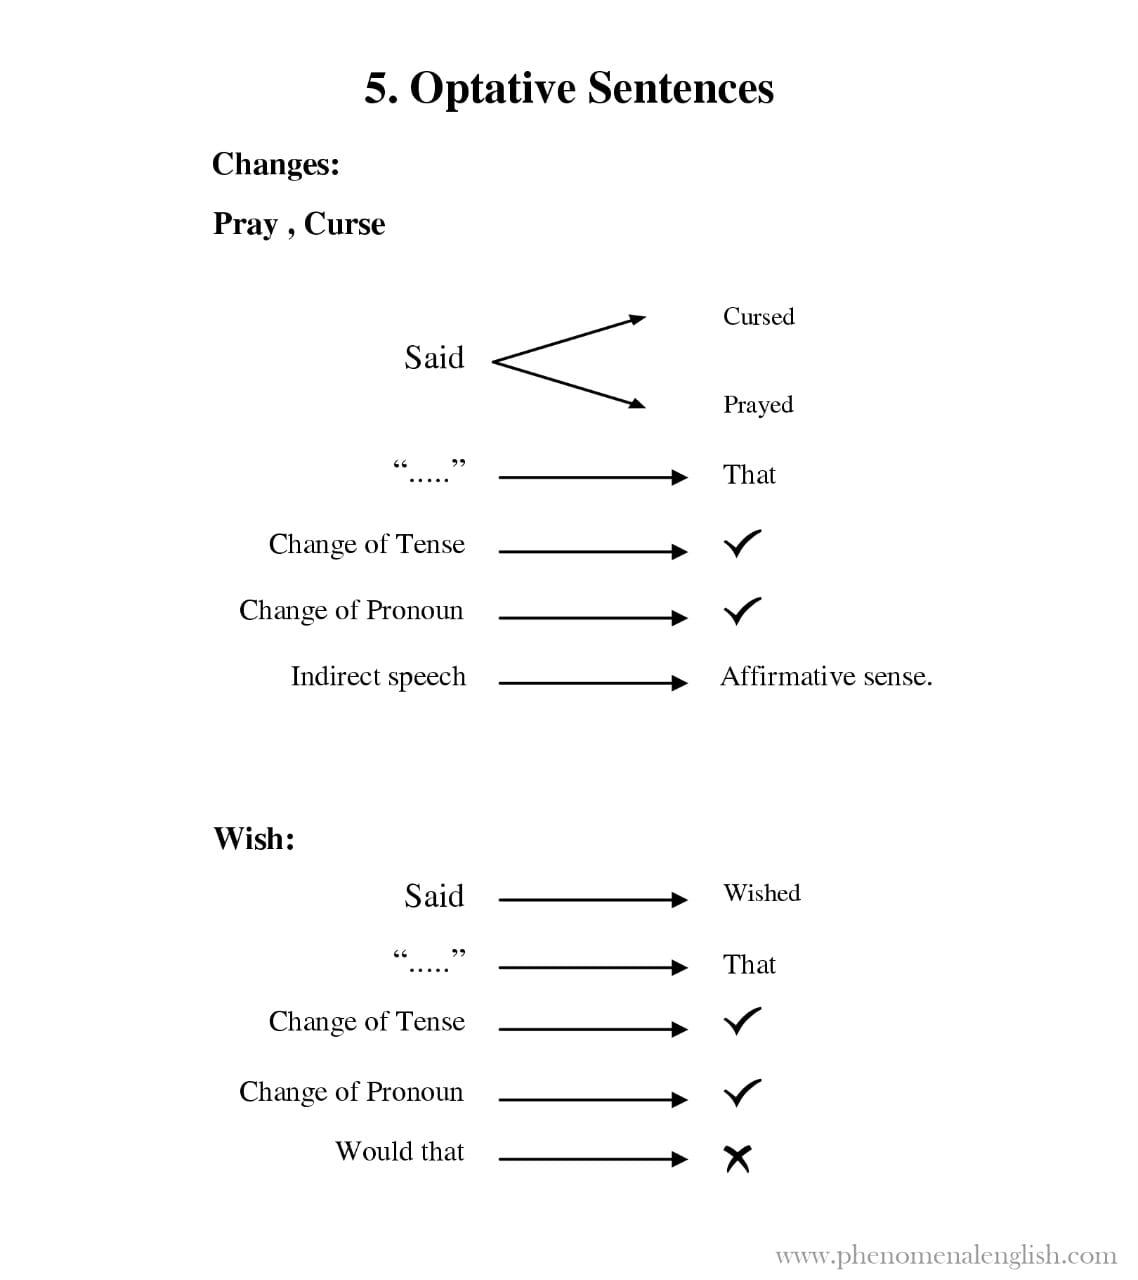 rules for change of optative sentences in direct and indirect